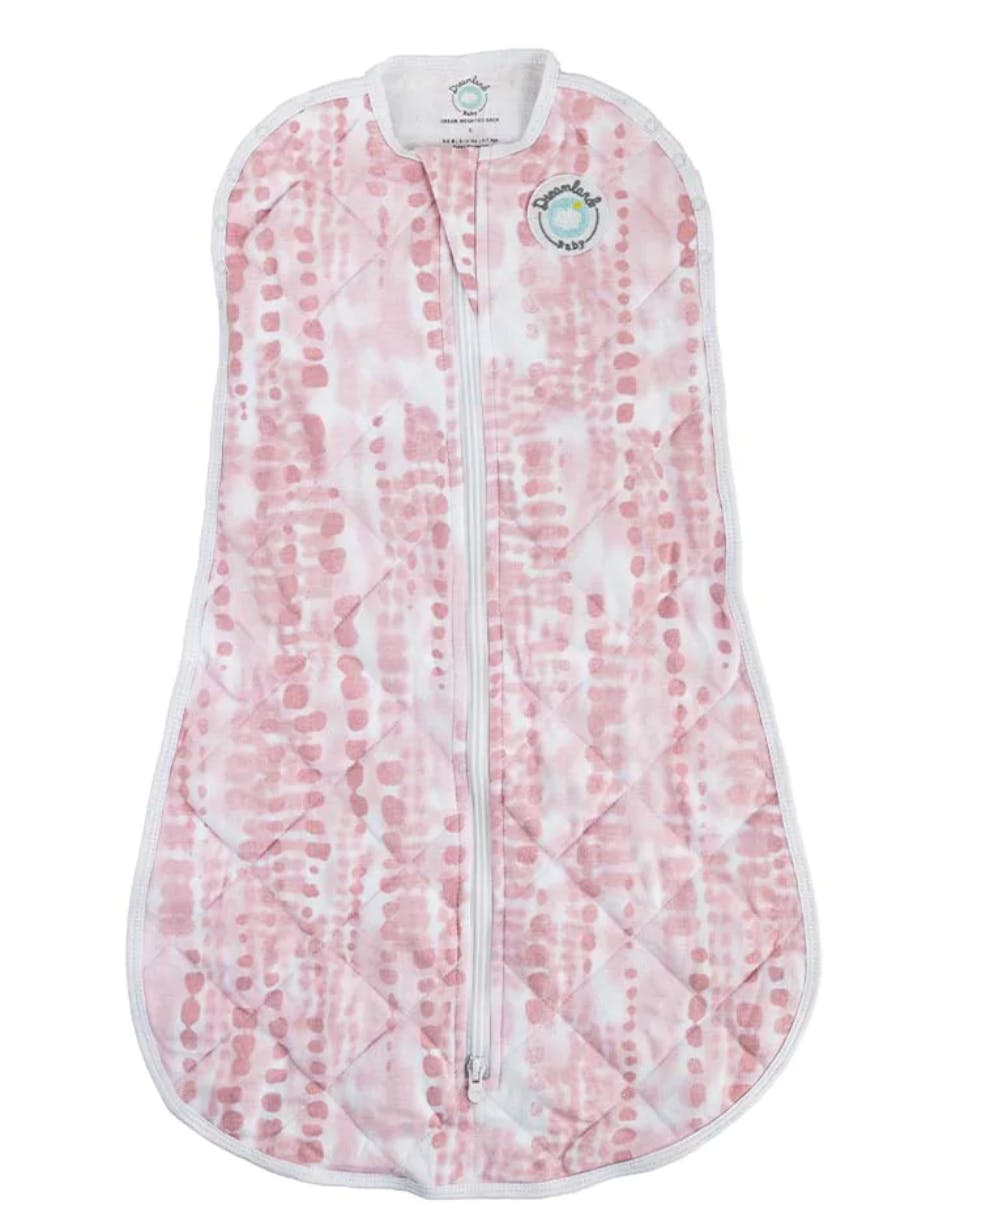 Dreamland Baby Dream Weighted Sleep Swaddle